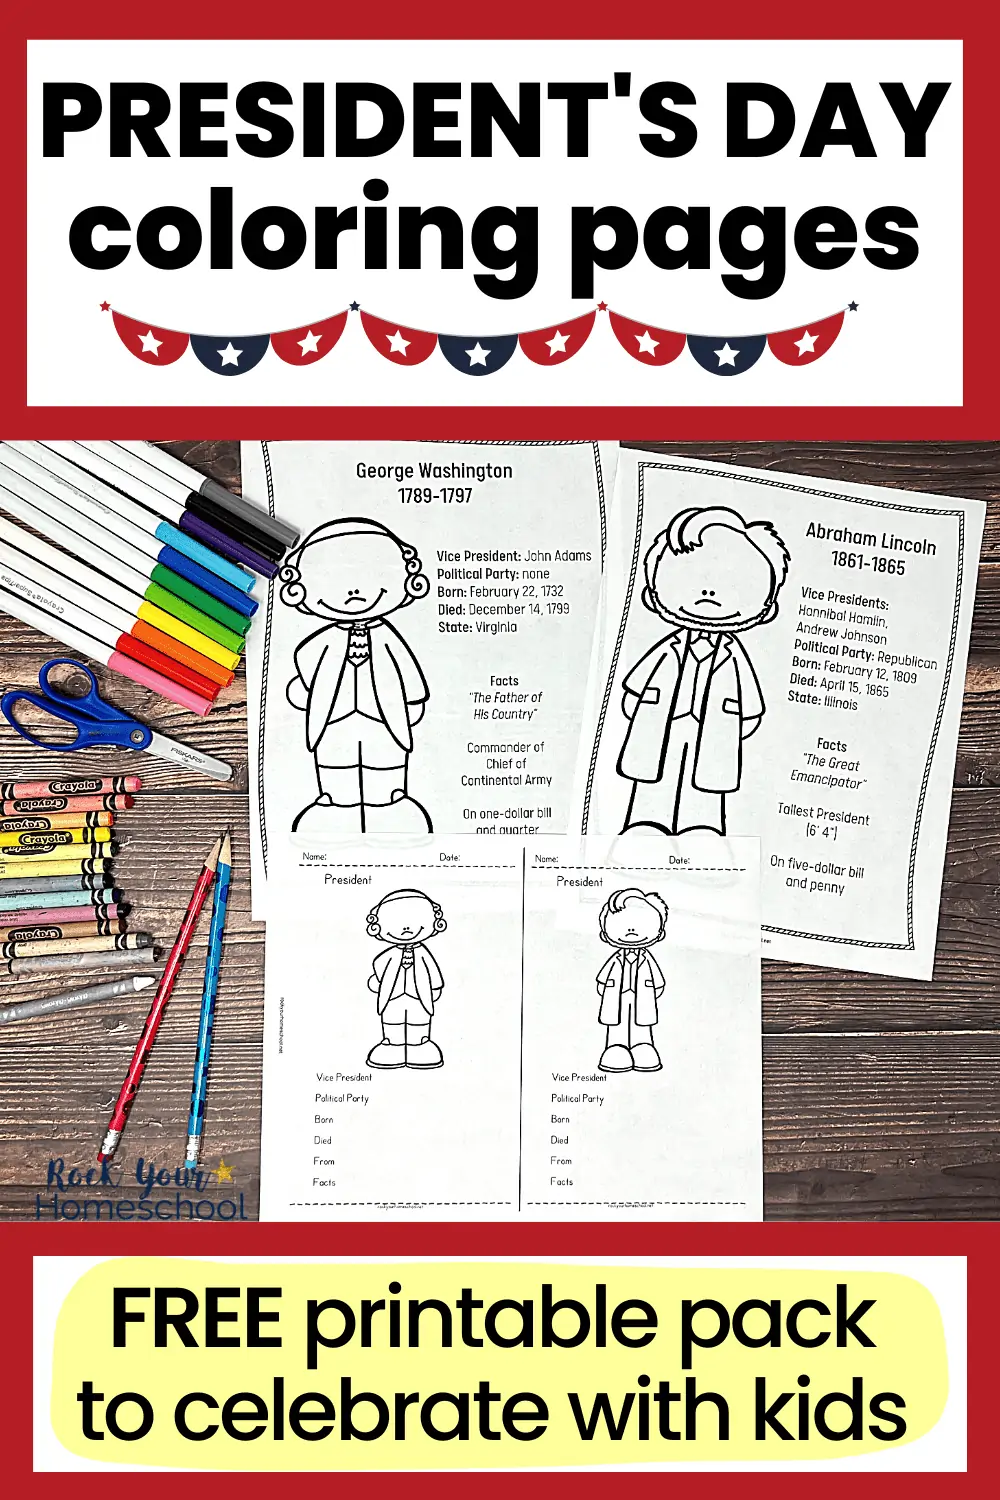 President’s Day Coloring Pages: 2 Free Ways to Celebrate with Kids